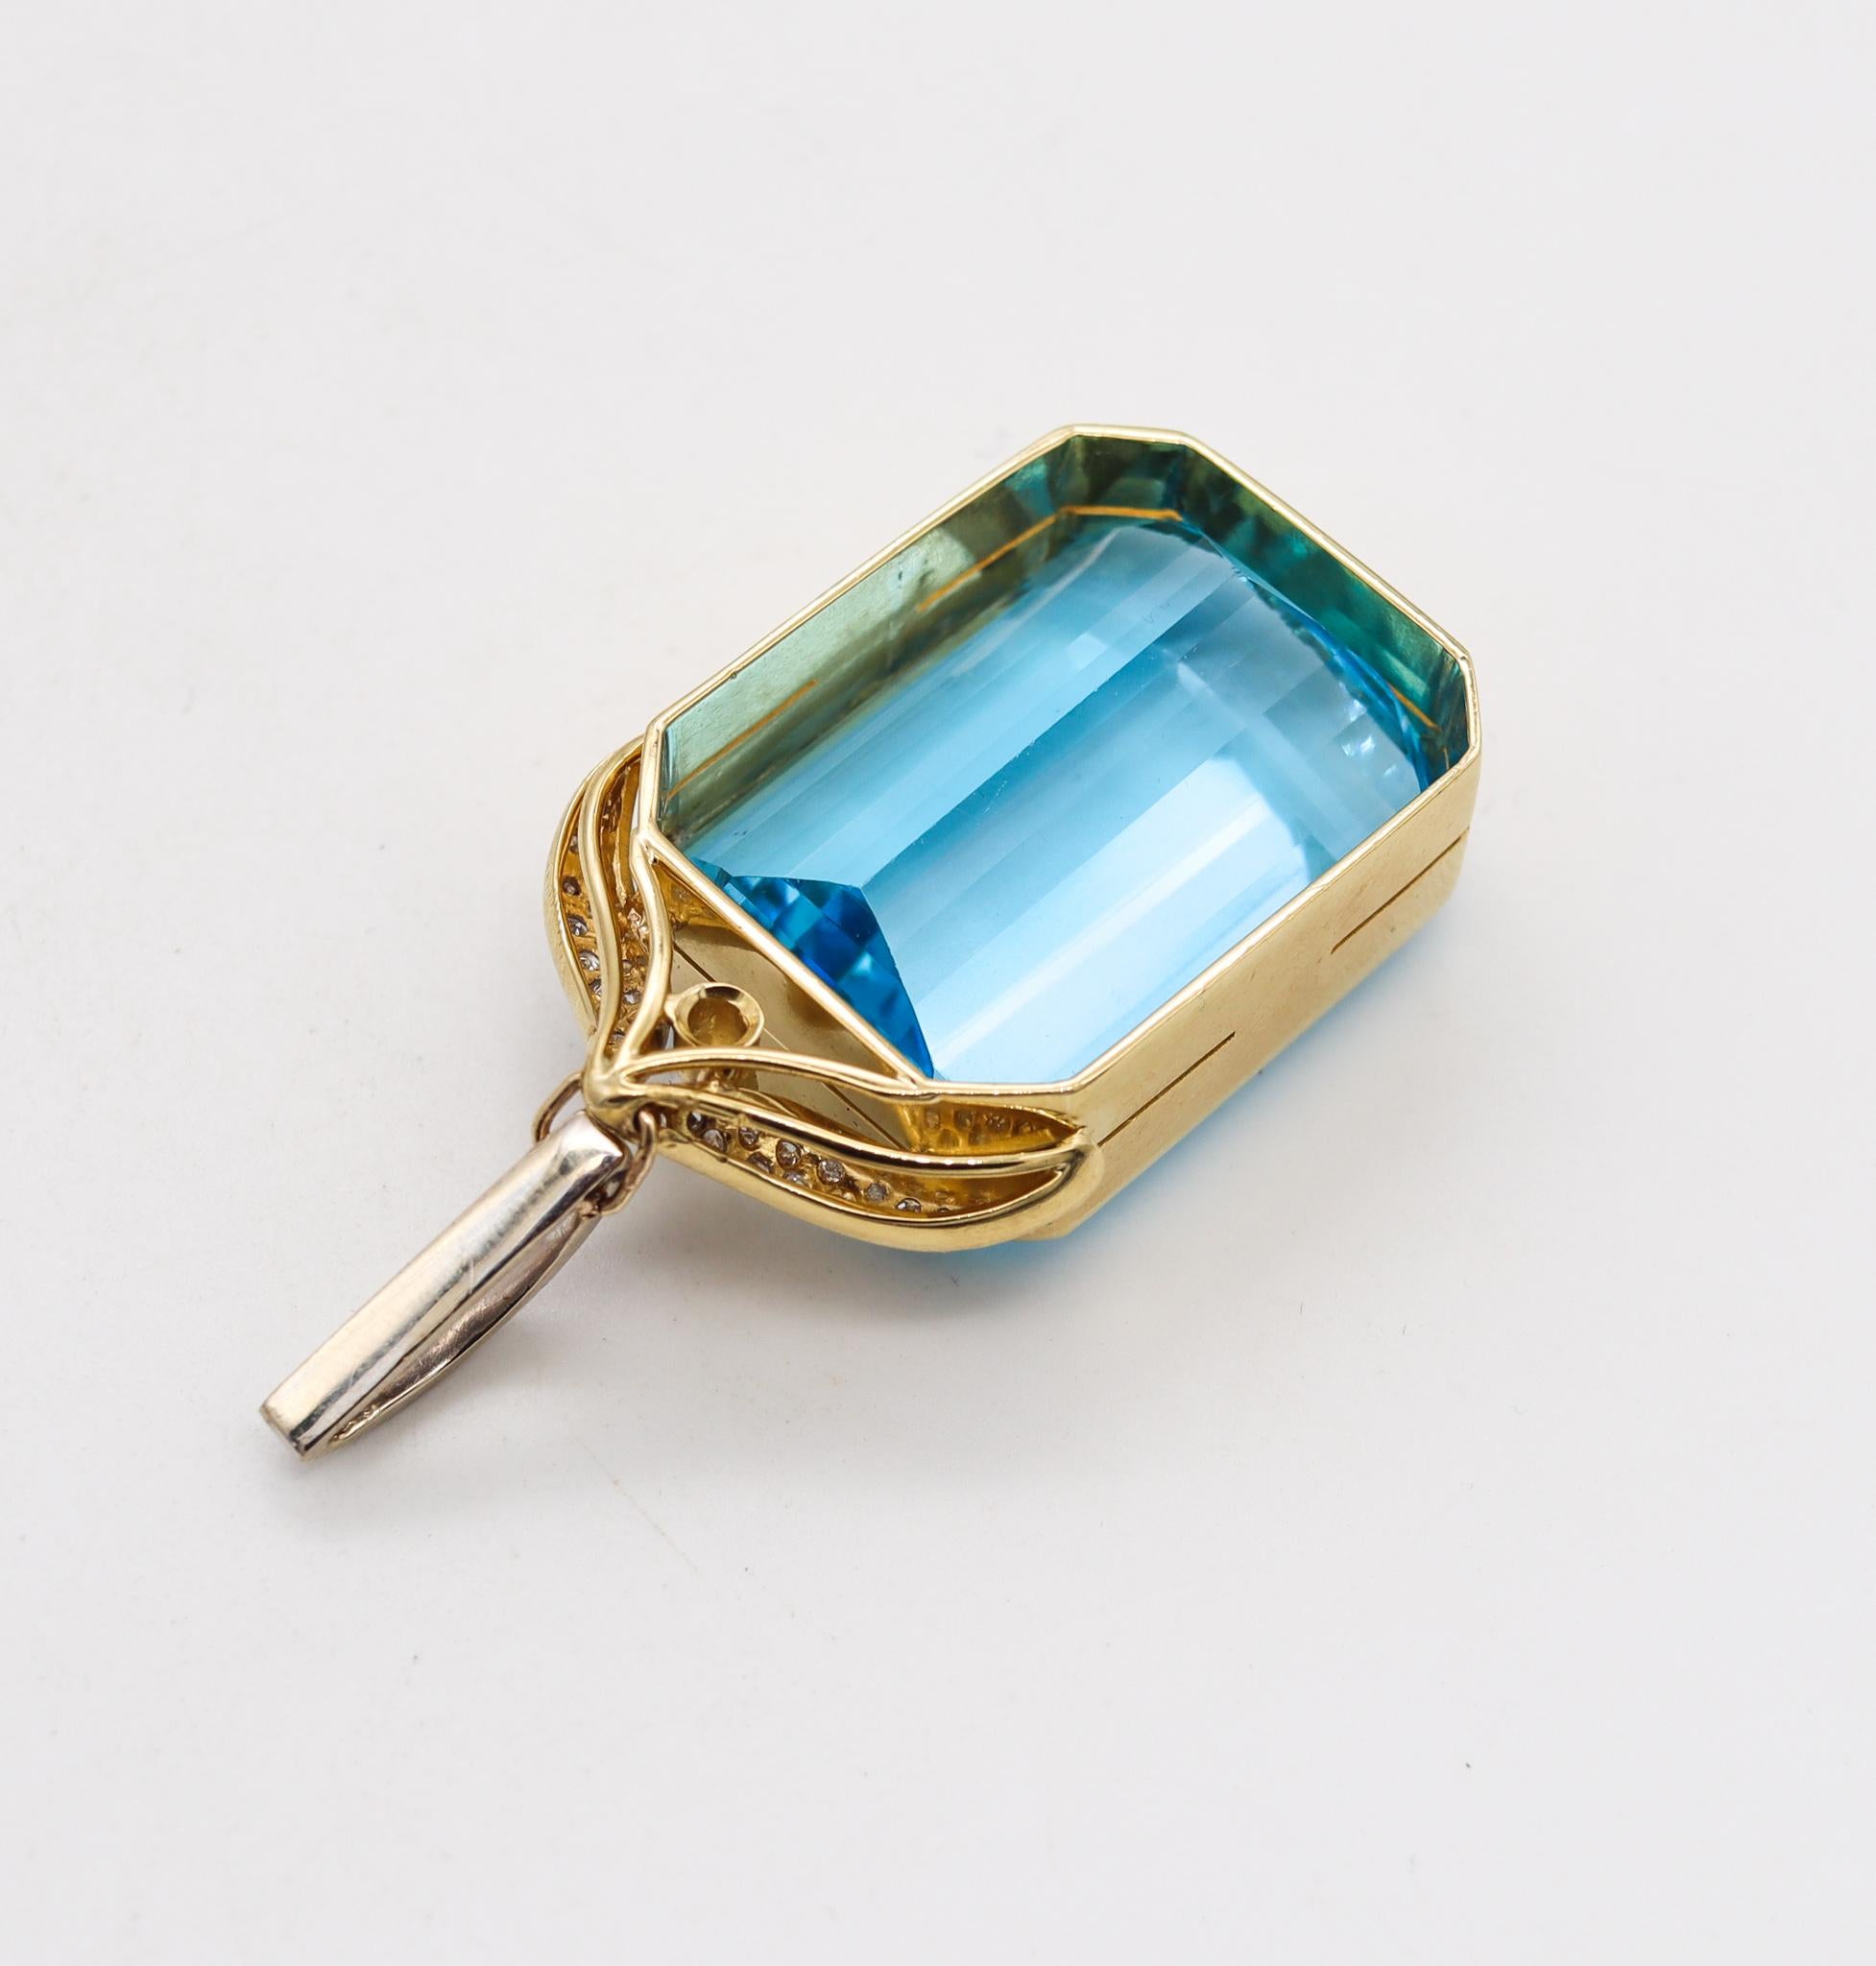 Mixed Cut Contemporary Large Pendant In 18Kt Gold With 72.06 Ctw In Aquamarine & Diamonds For Sale